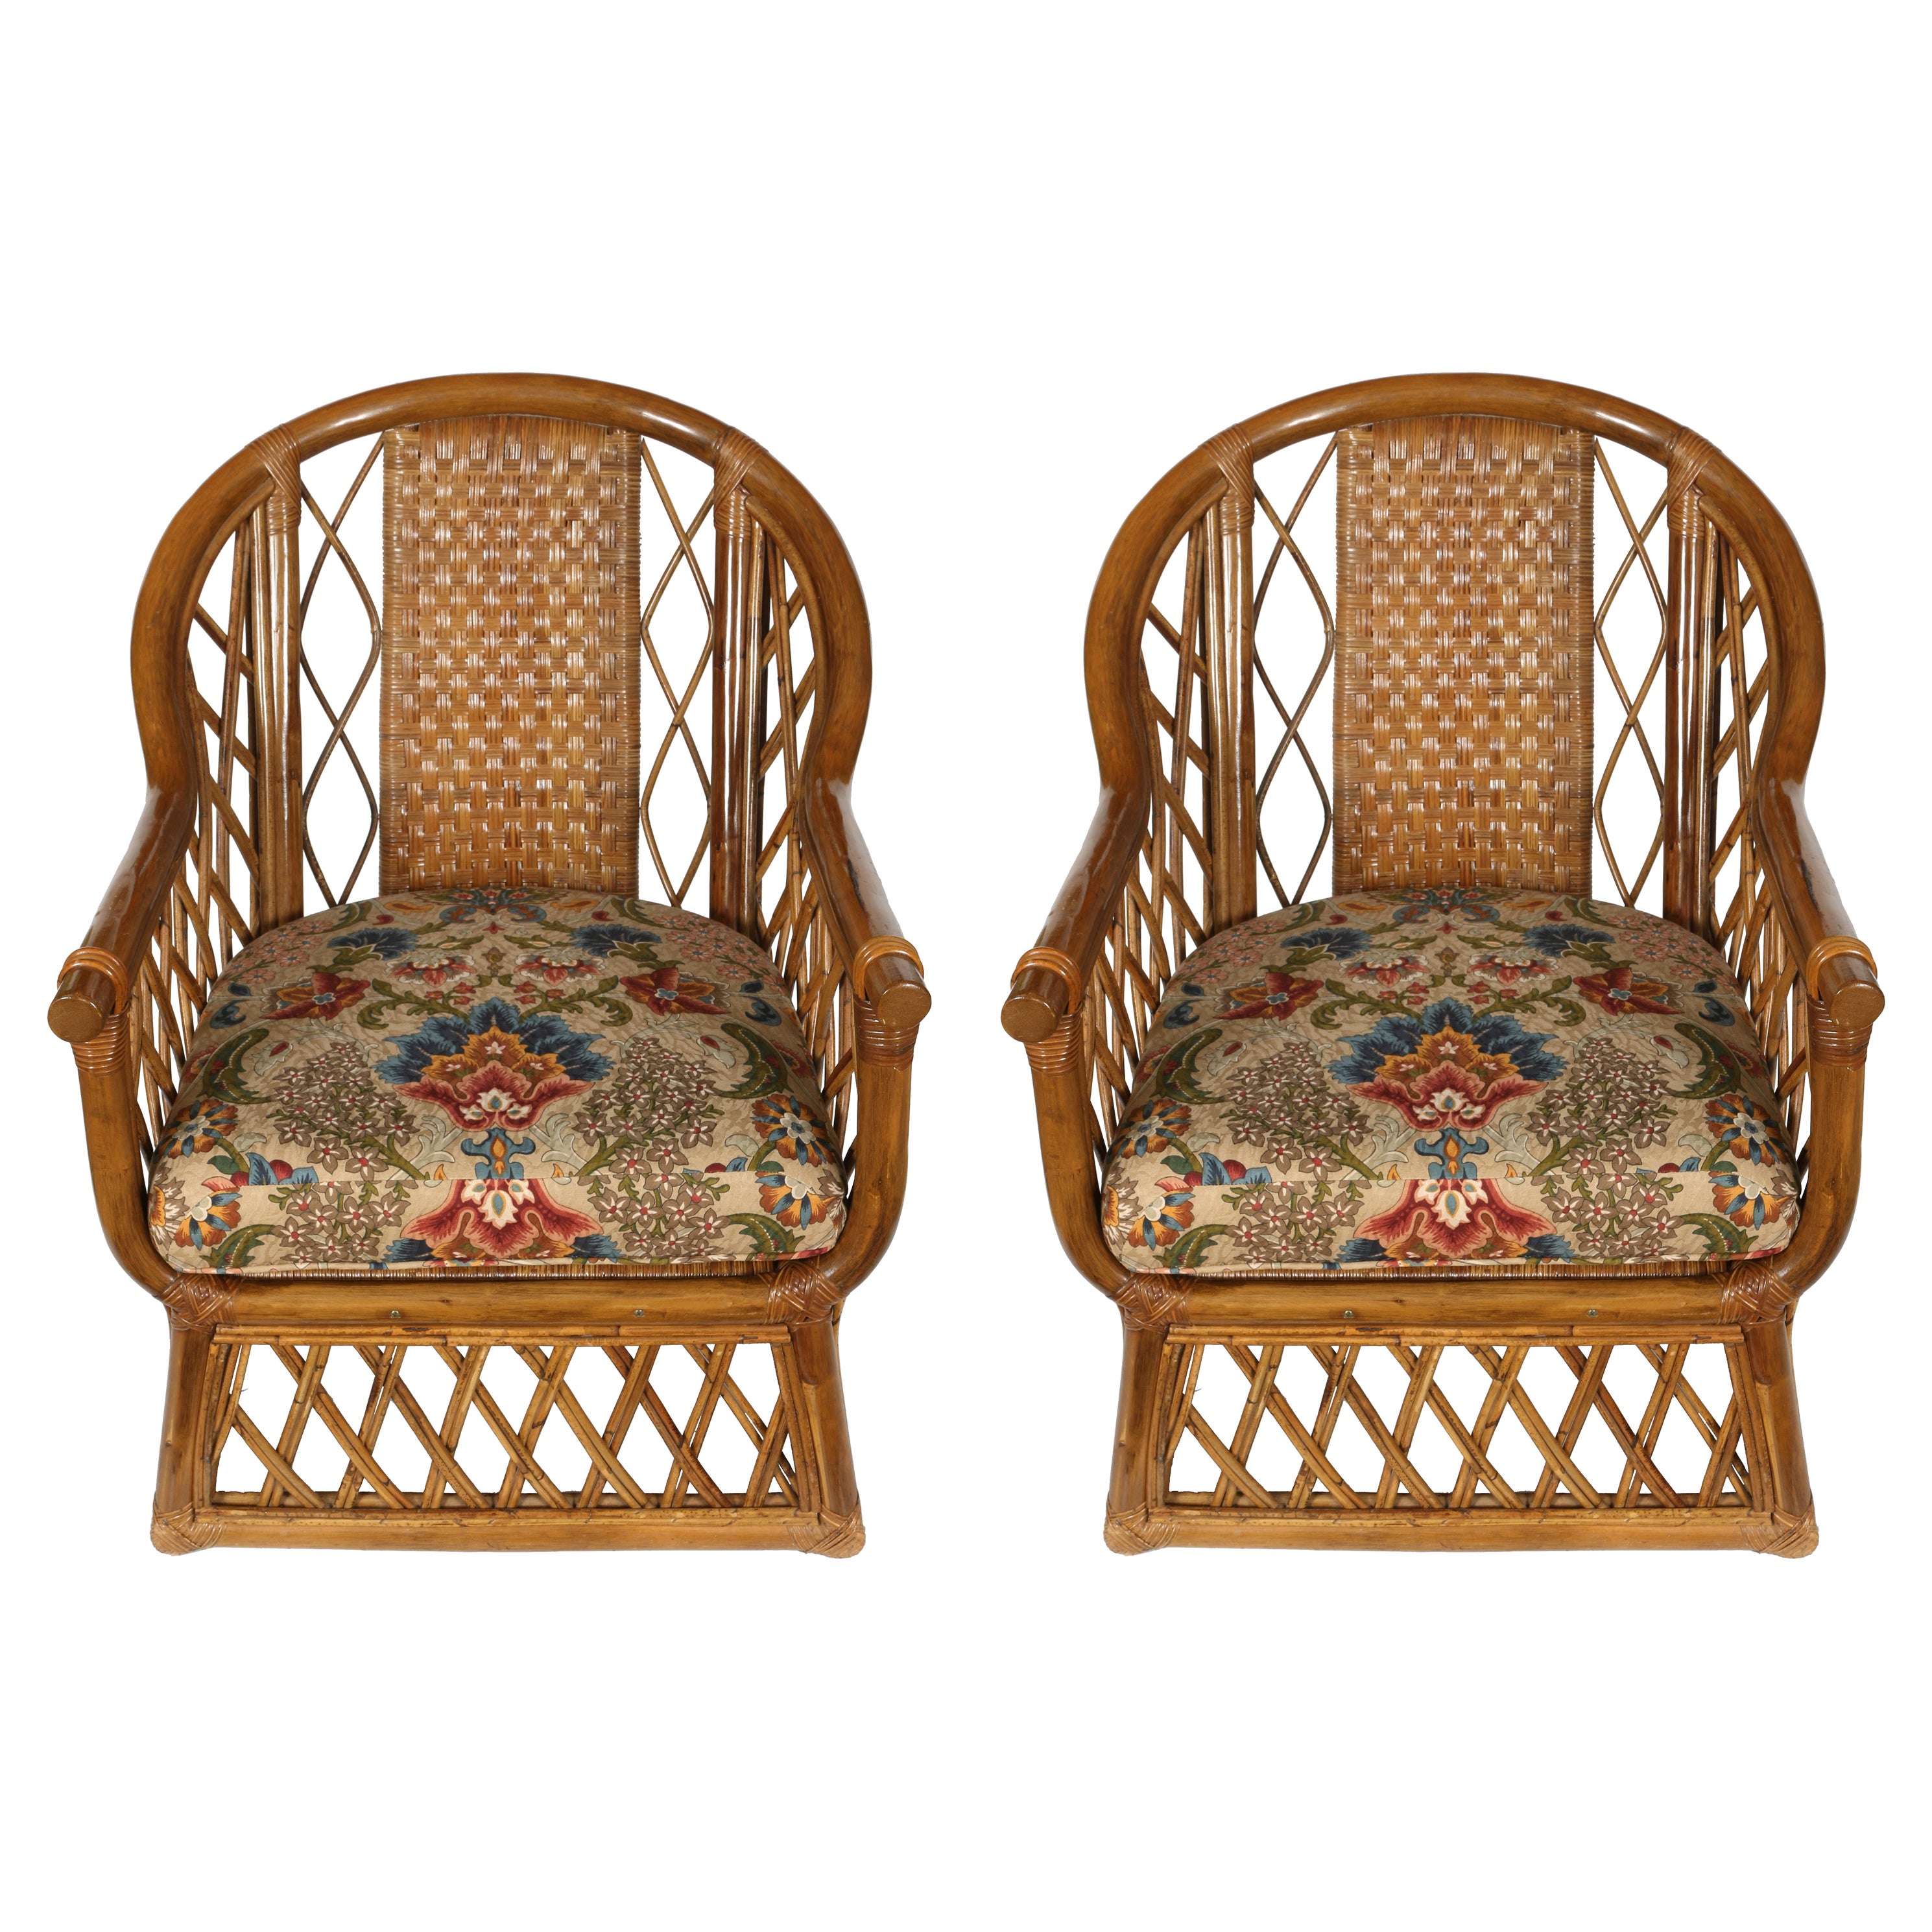 Pair of Rattan Club Chairs